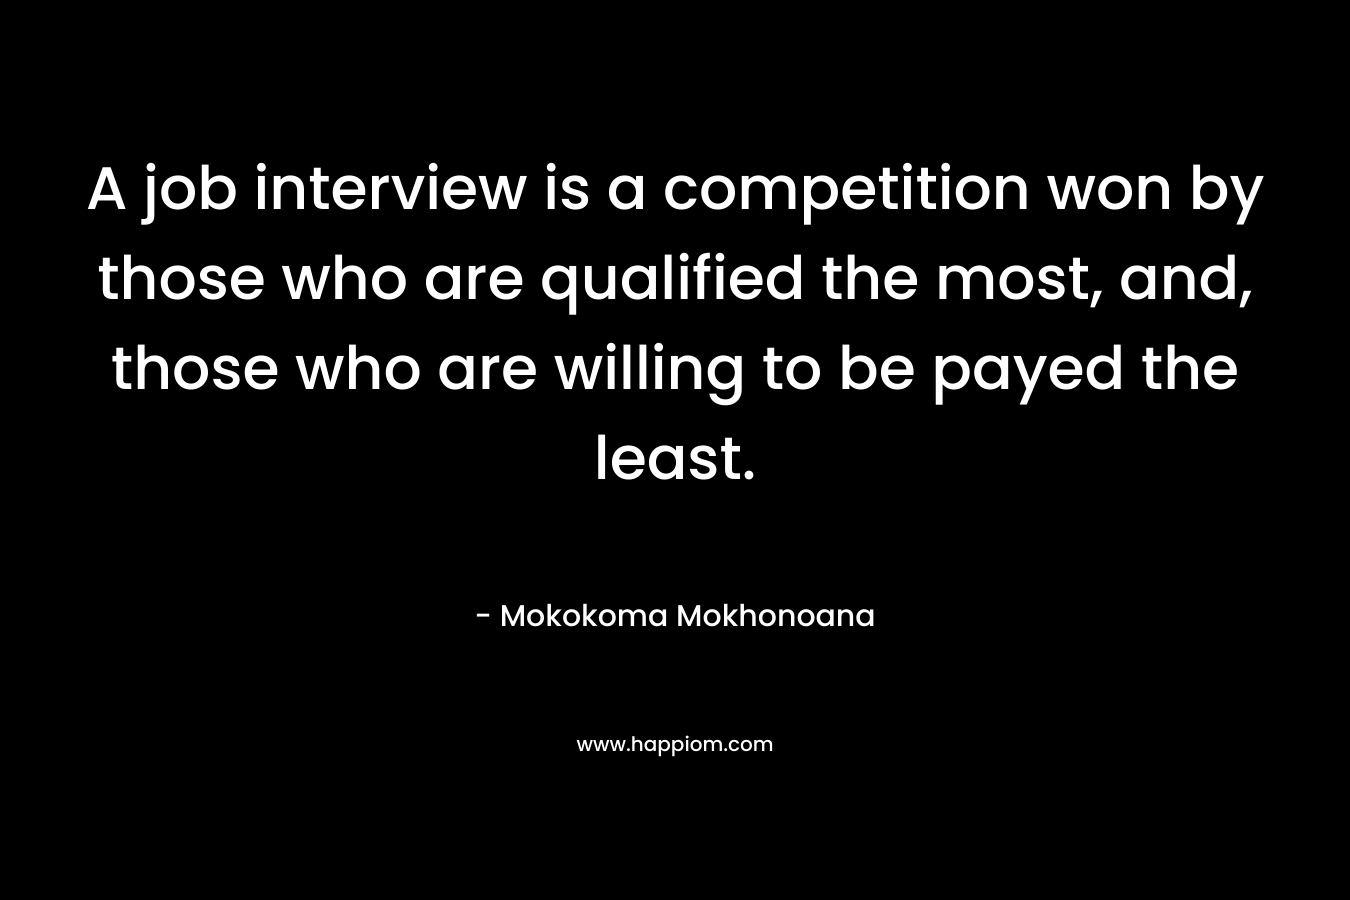 A job interview is a competition won by those who are qualified the most, and, those who are willing to be payed the least.